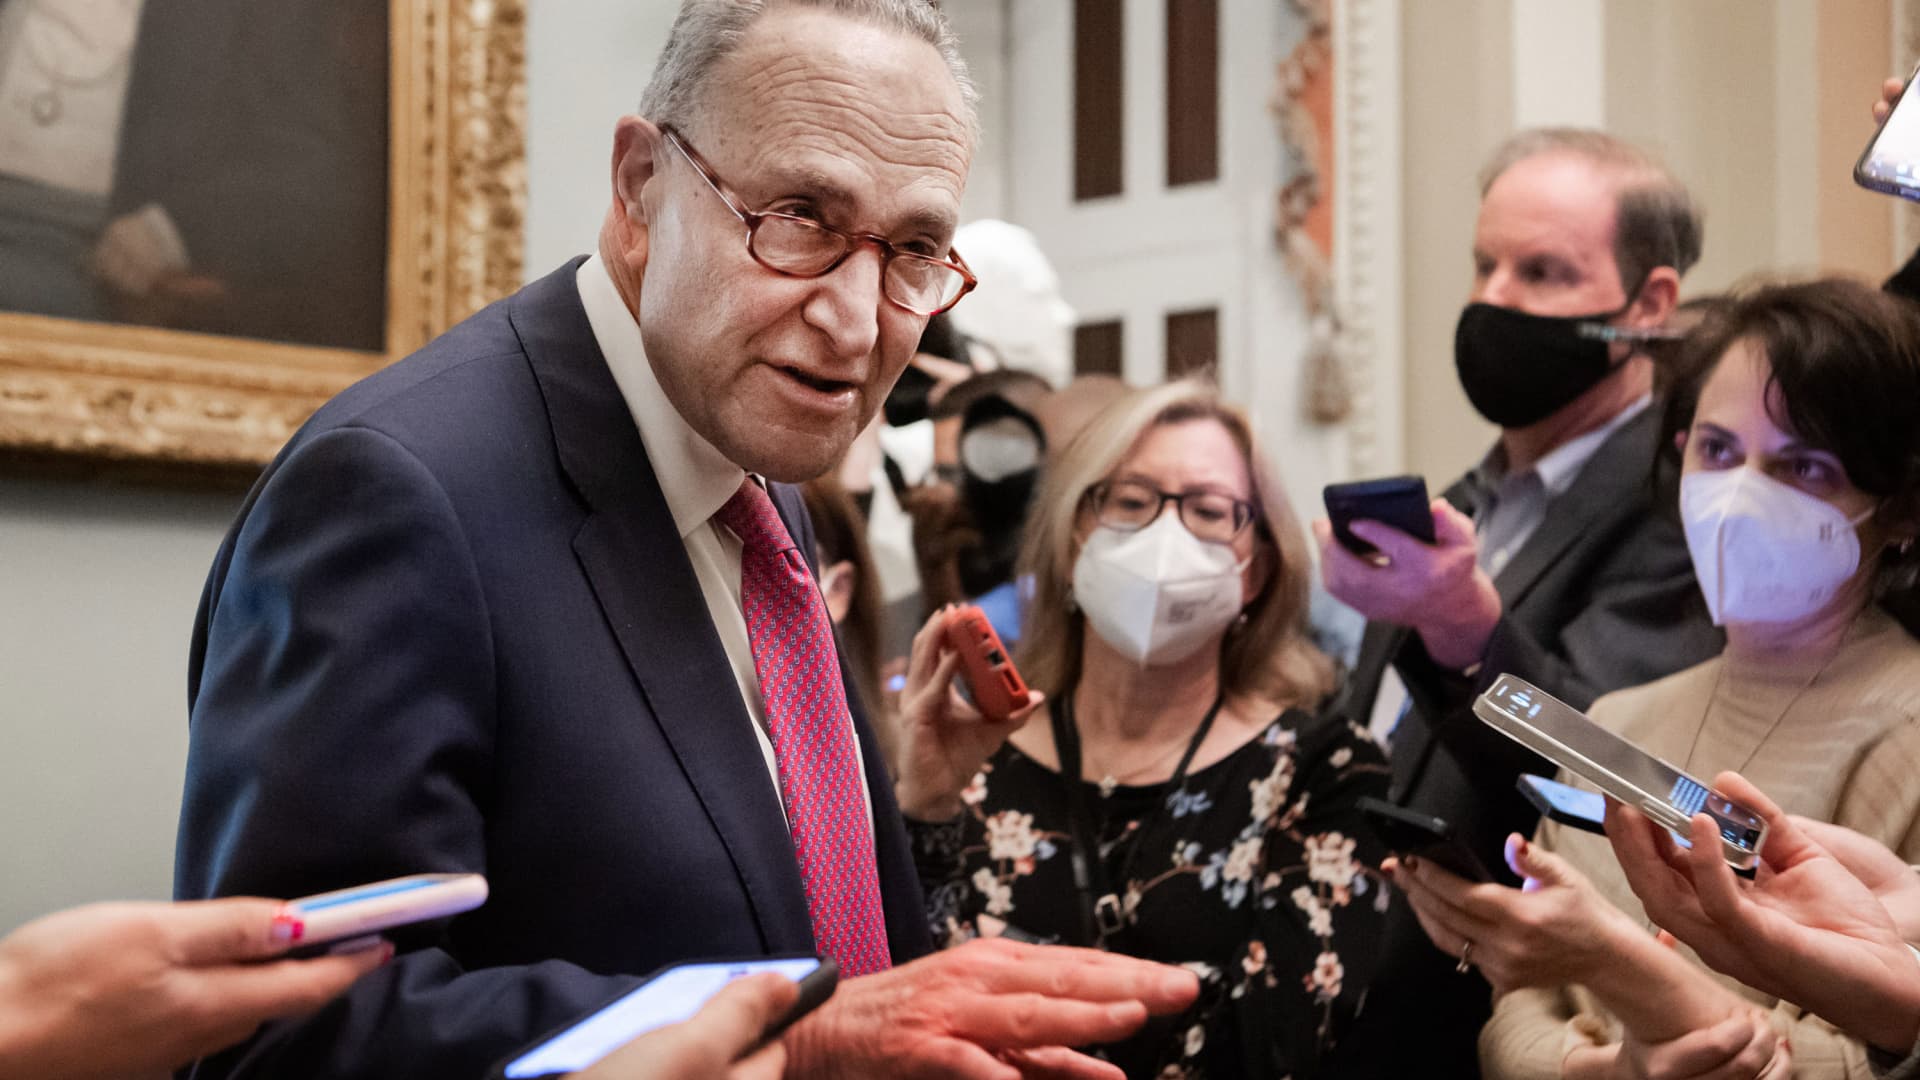 US Senate Majority Leader Chuck Schumer speaks with the press as he leaves a lunch with Senate Democrats at the US Capitol in Washington, DC, February 17, 2022.